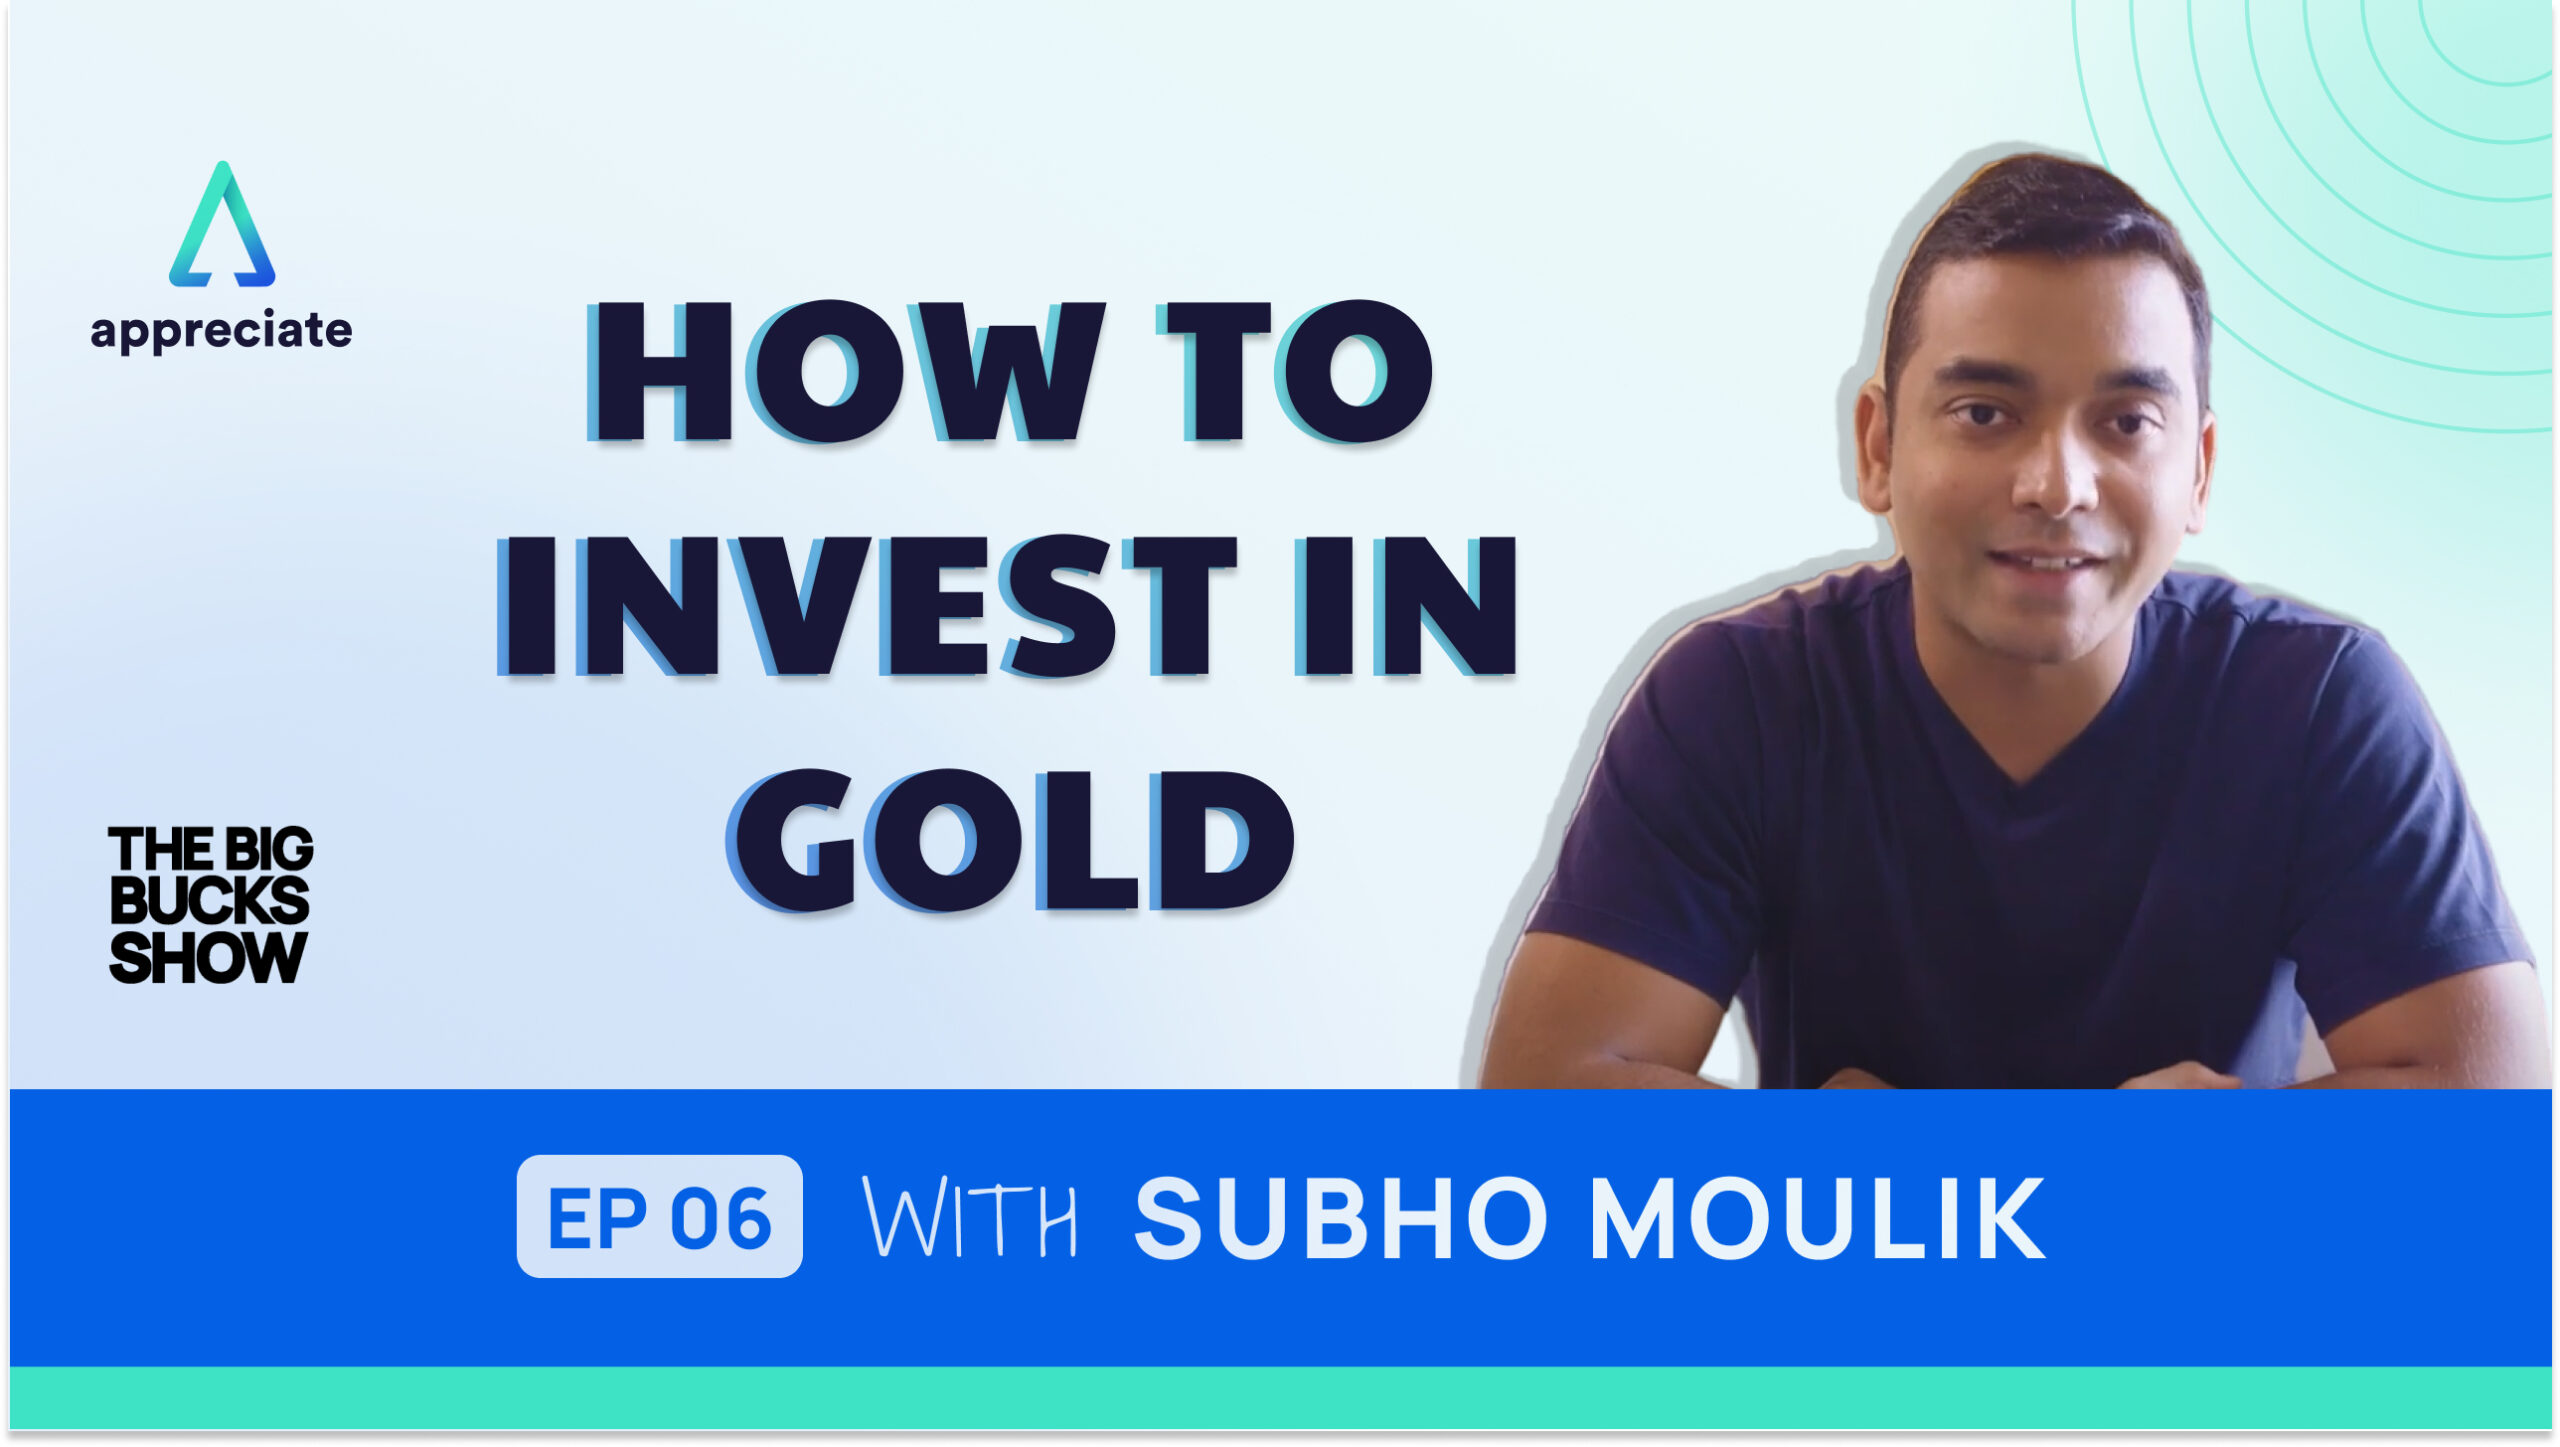 How to invest in gold is the title of a podcast that is hosted by Subho. This is also a YouTube video thumbnail.